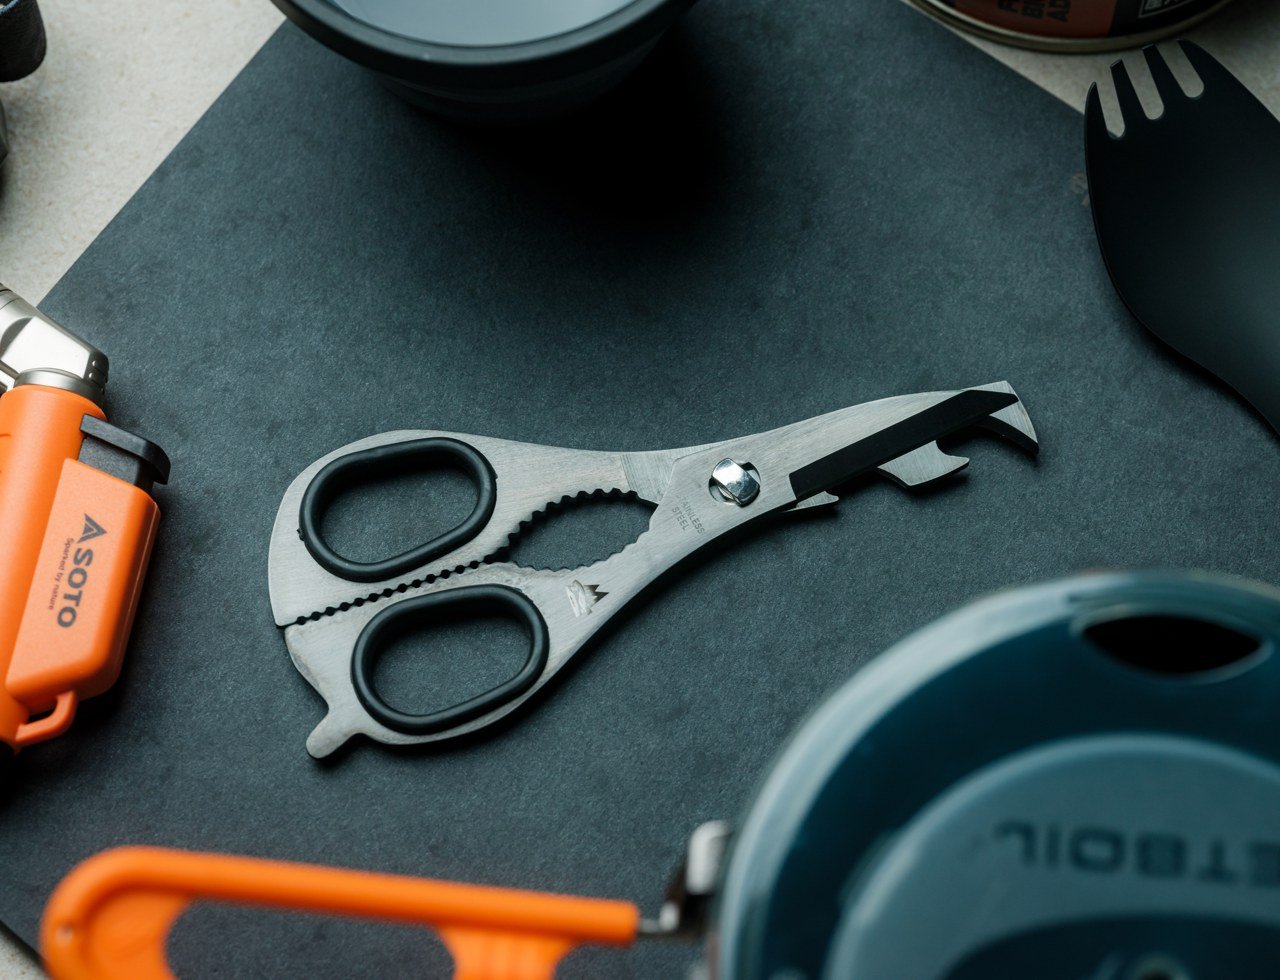 #8-in-1 EDC multitool scissors are the perfect sidekick for your urban and outdoor adventures